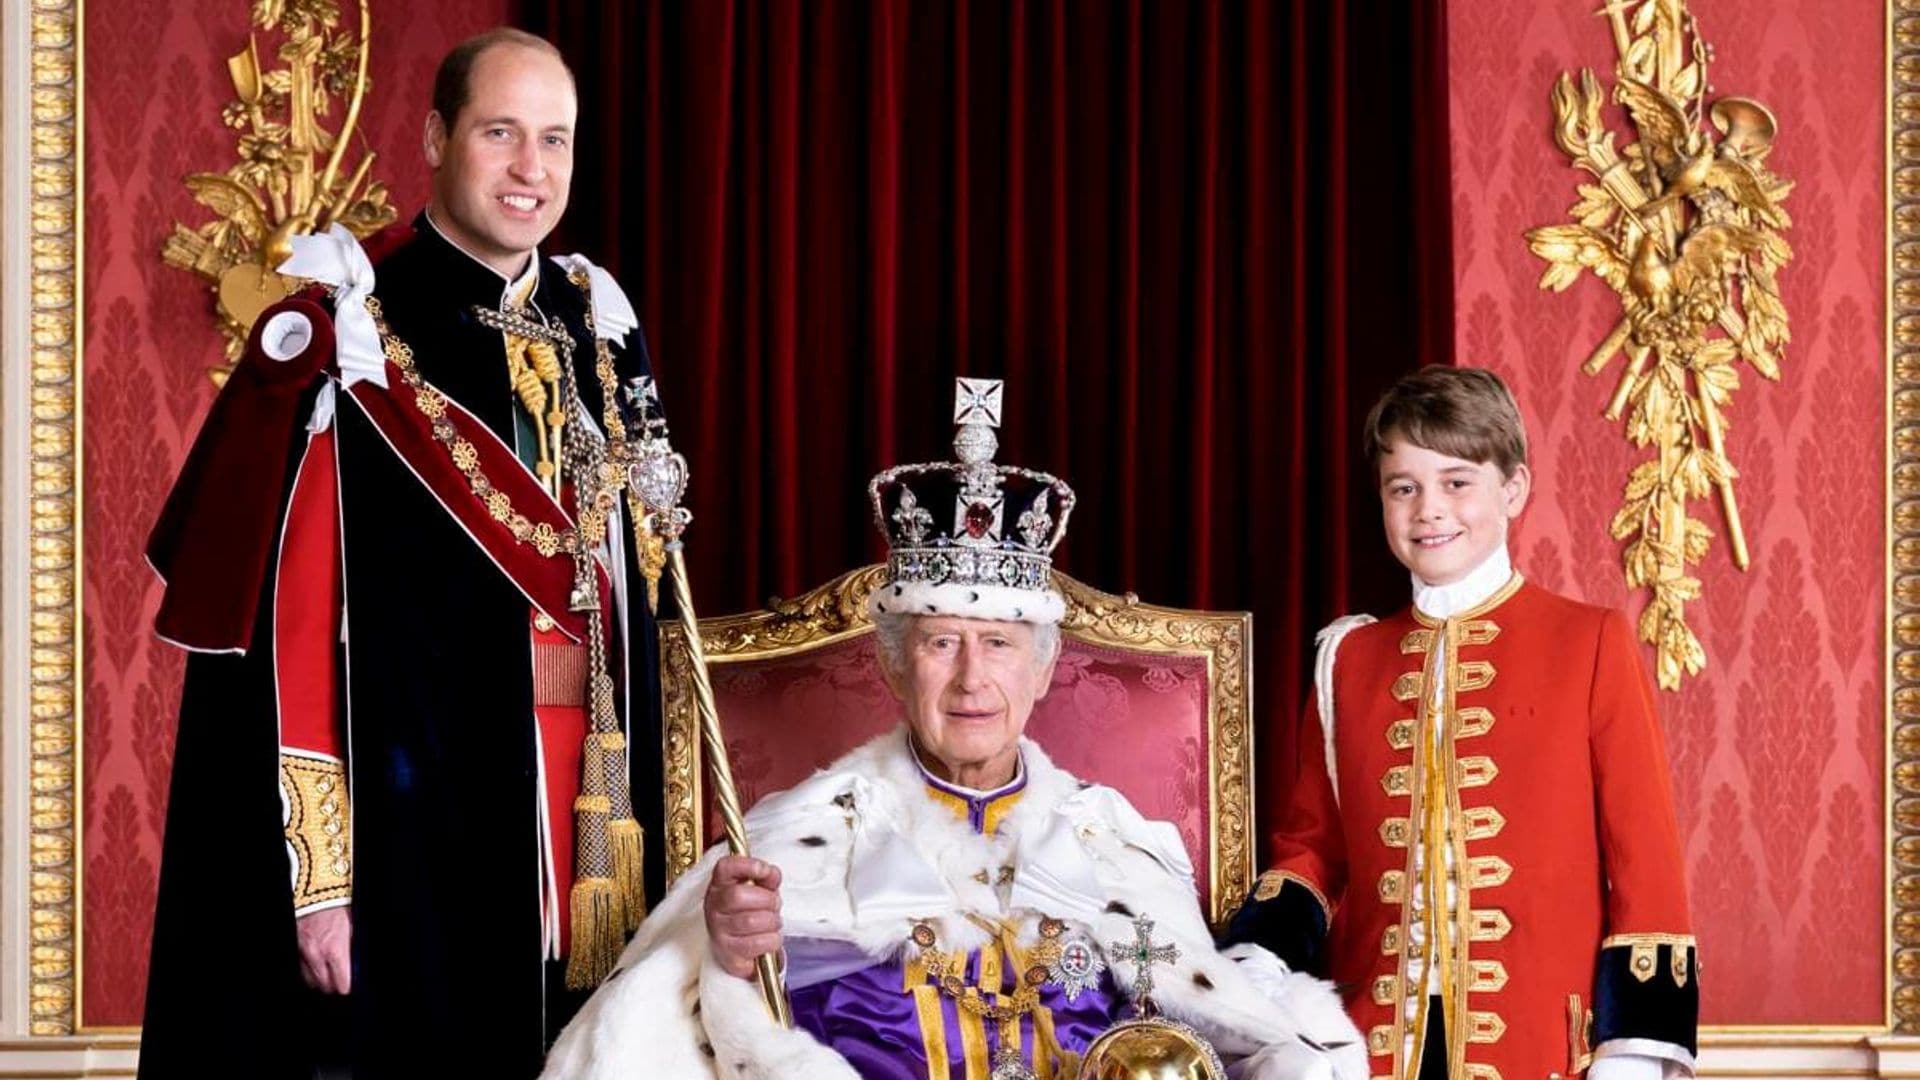 King Charles joined by grandson Prince George in new coronation portraits